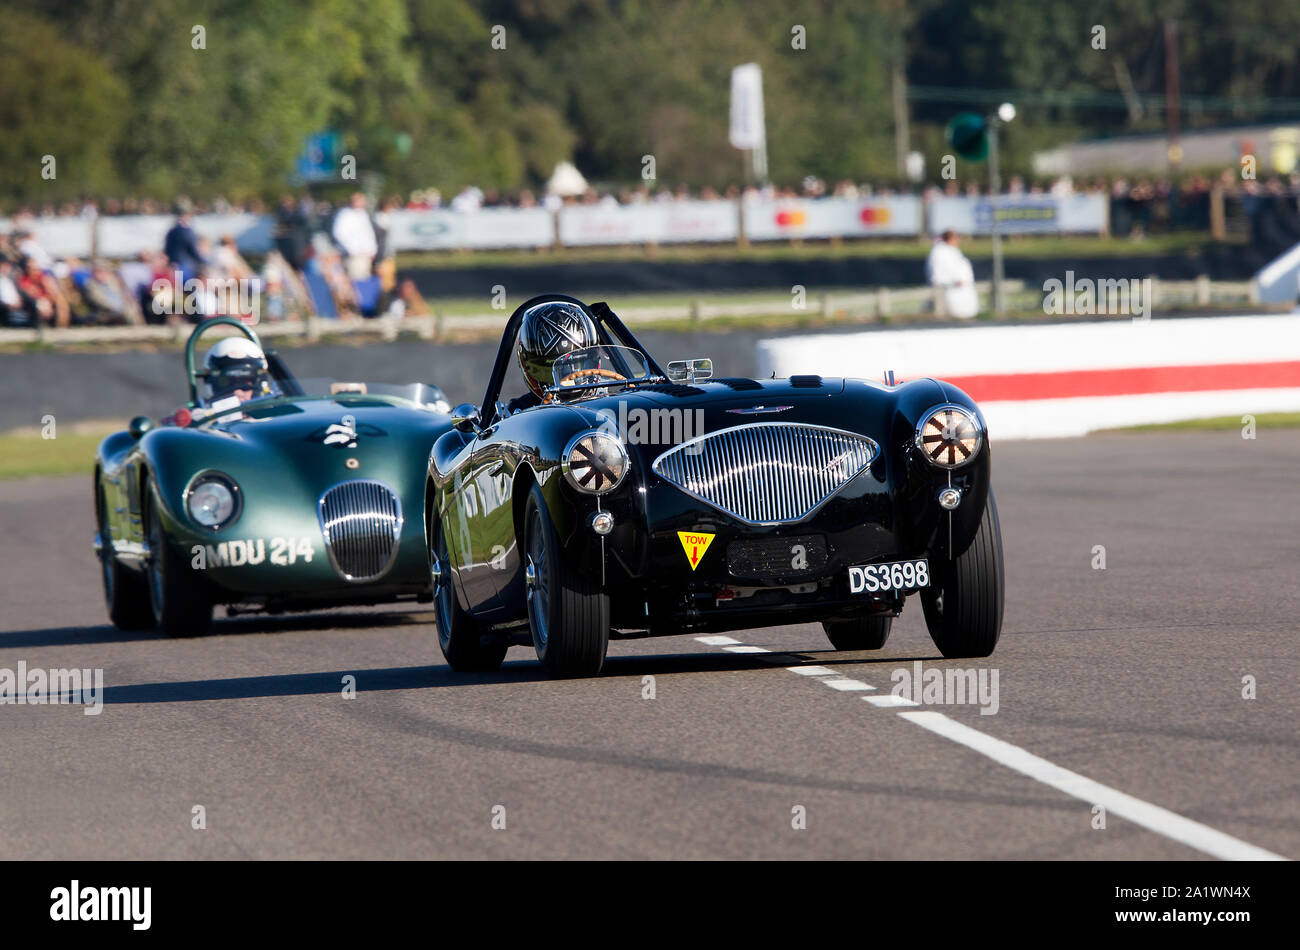 1954 Austin-Healey-Corvette BN1 driven by Michael Lyons in The Freddie March Memorial Trophy race at The Goodwood Revival 14th Sept 2019 in Chichester Stock Photo